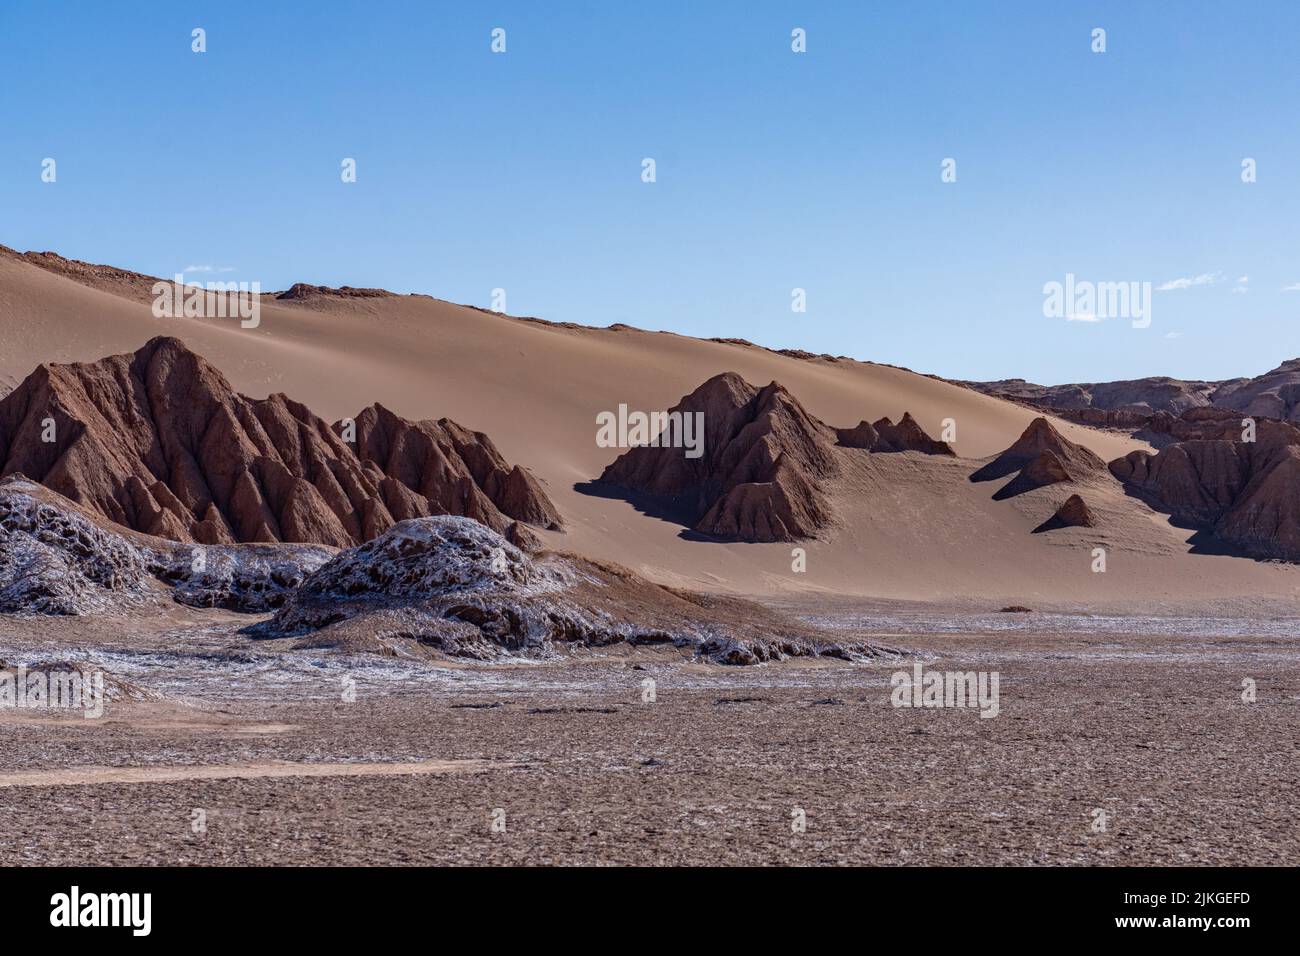 Sand dunes and siltstone formations in the Salt Mountains in the Valley of the Moon or Valle de Luna. San Pedro de Atacama, Chile. Stock Photo